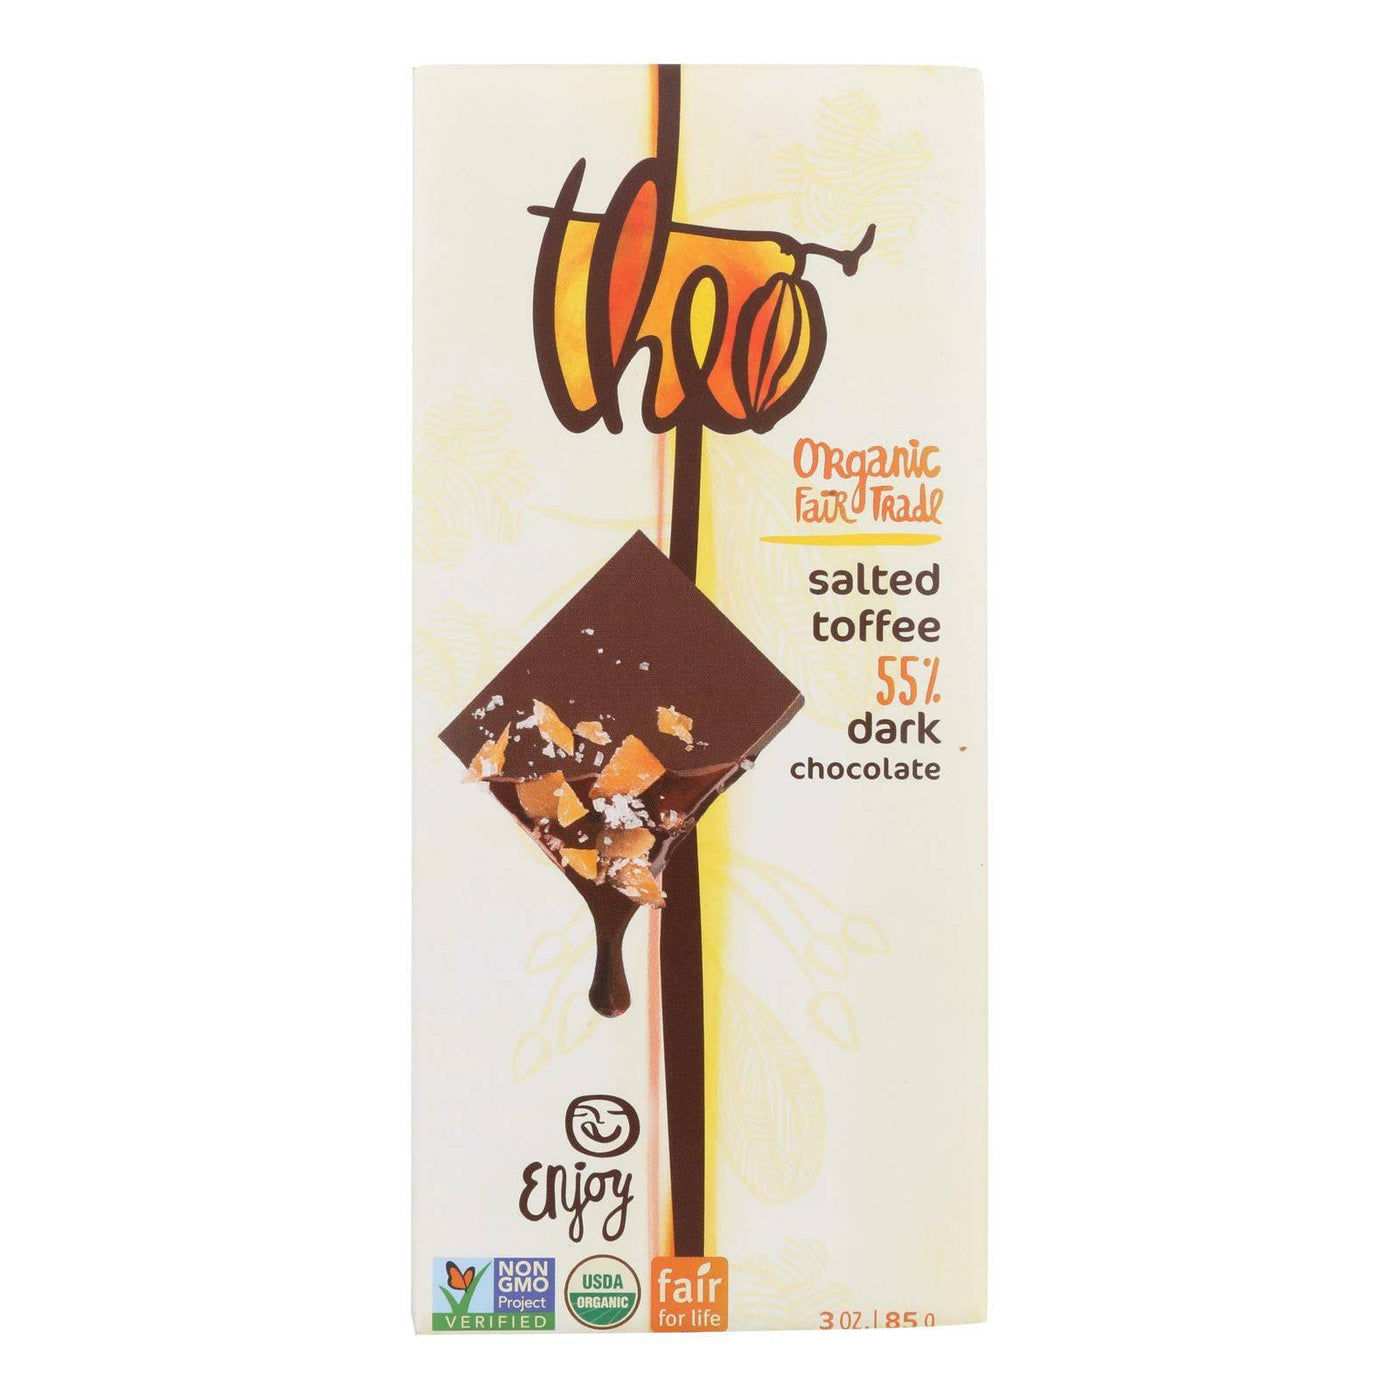 Theo Chocolate Salted Toffee - 55 Percent Dark Chocolate - Case Of 12 - 3 Oz. | OnlyNaturals.us